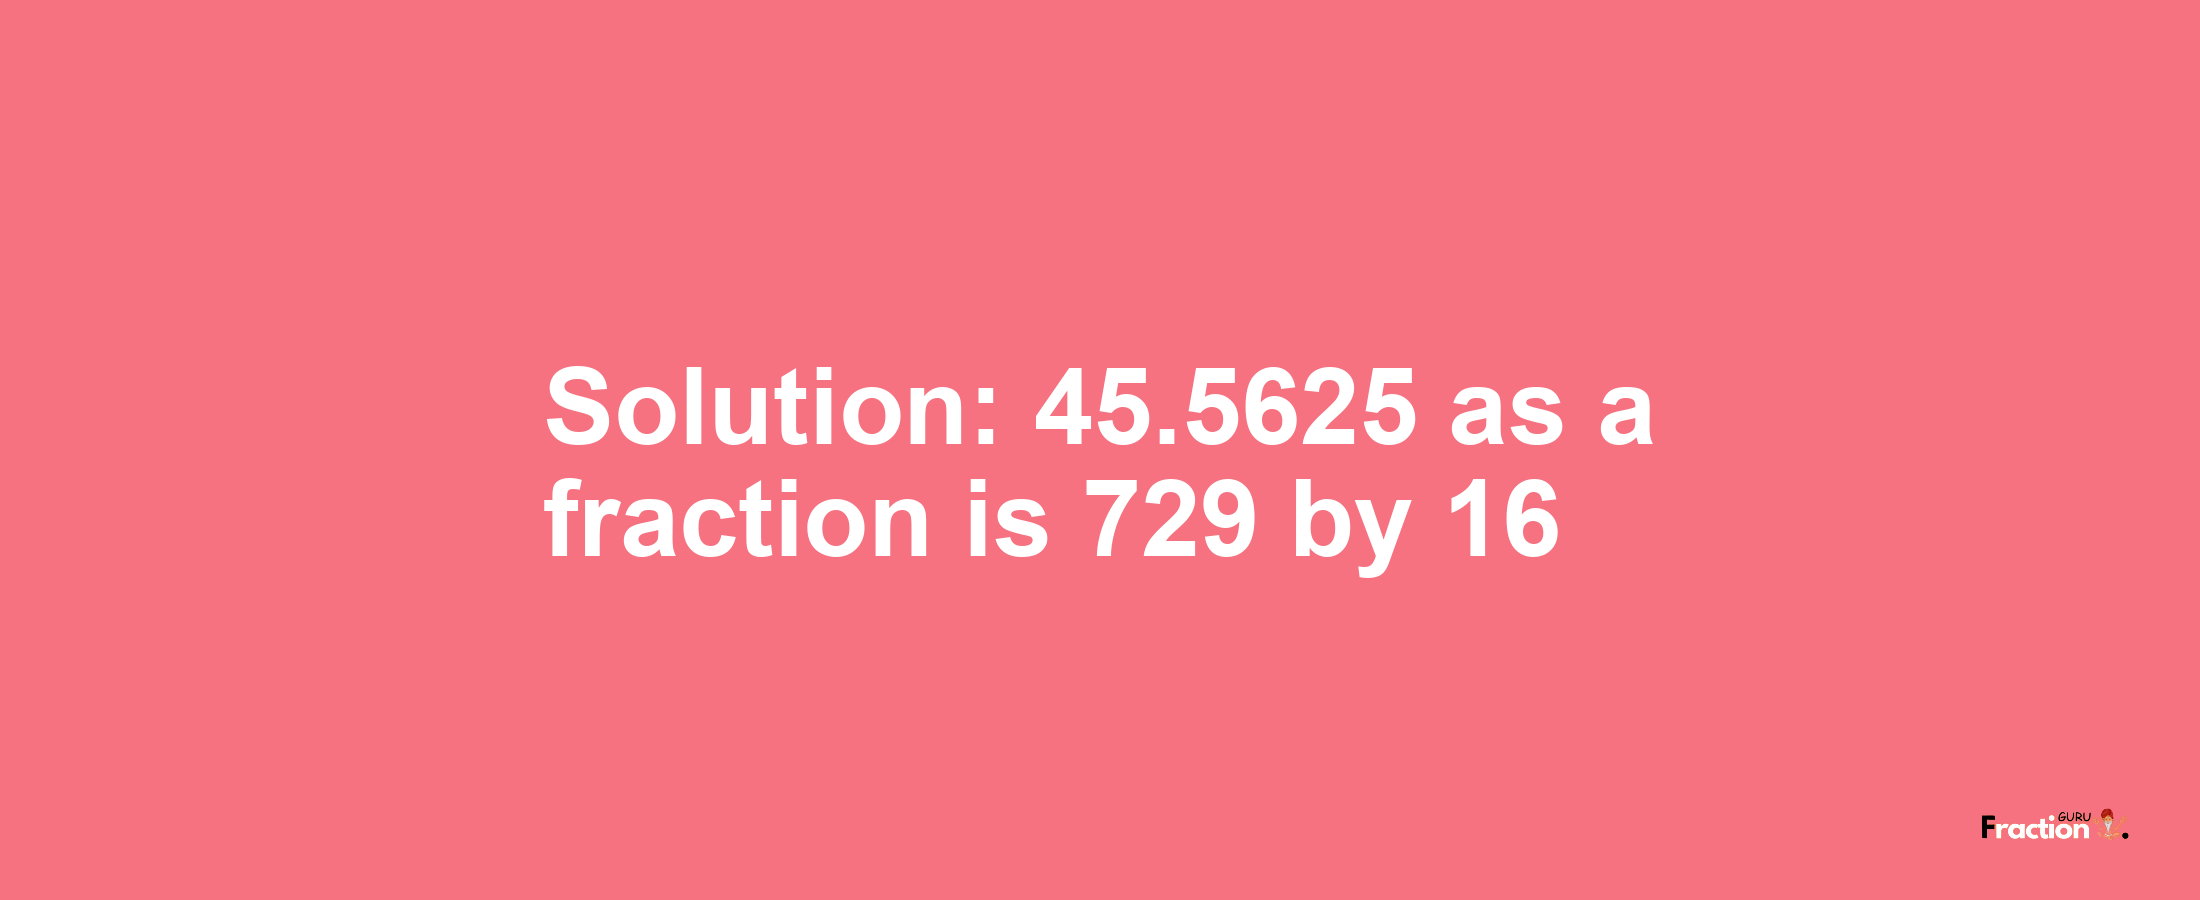 Solution:45.5625 as a fraction is 729/16